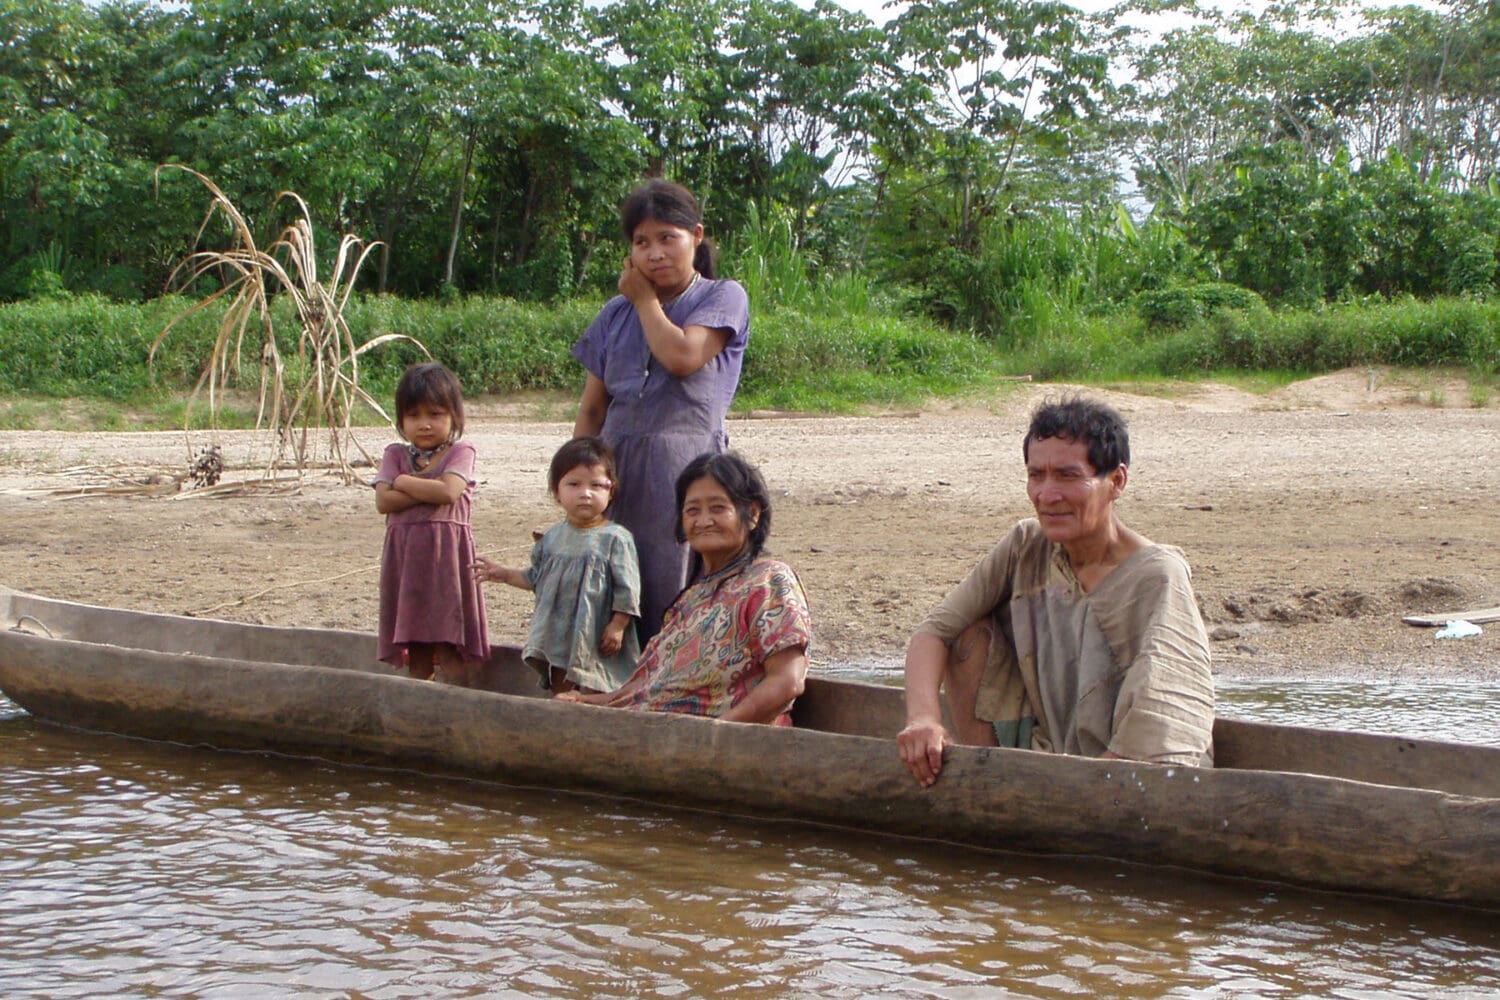 A Tsimane family travels upstream in the local river